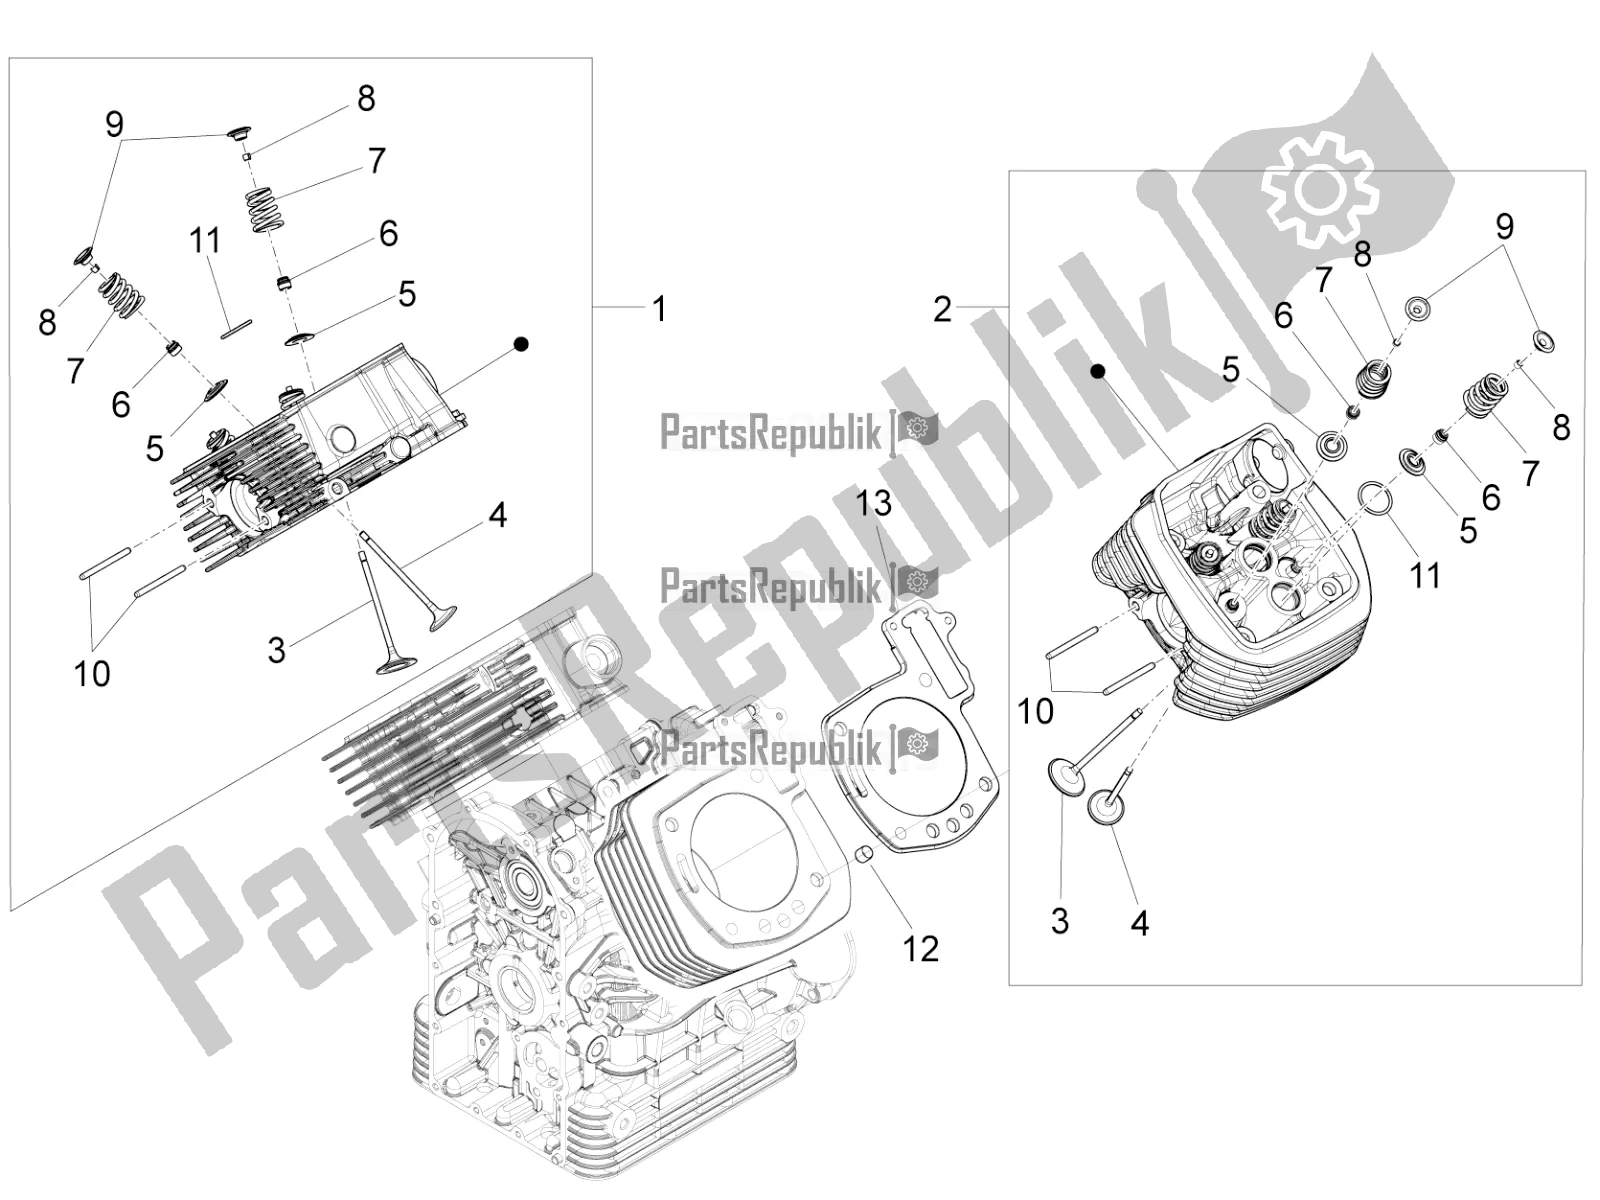 All parts for the Cylinder Head - Valves of the Moto-Guzzi Eldorado 1400 ABS 2020